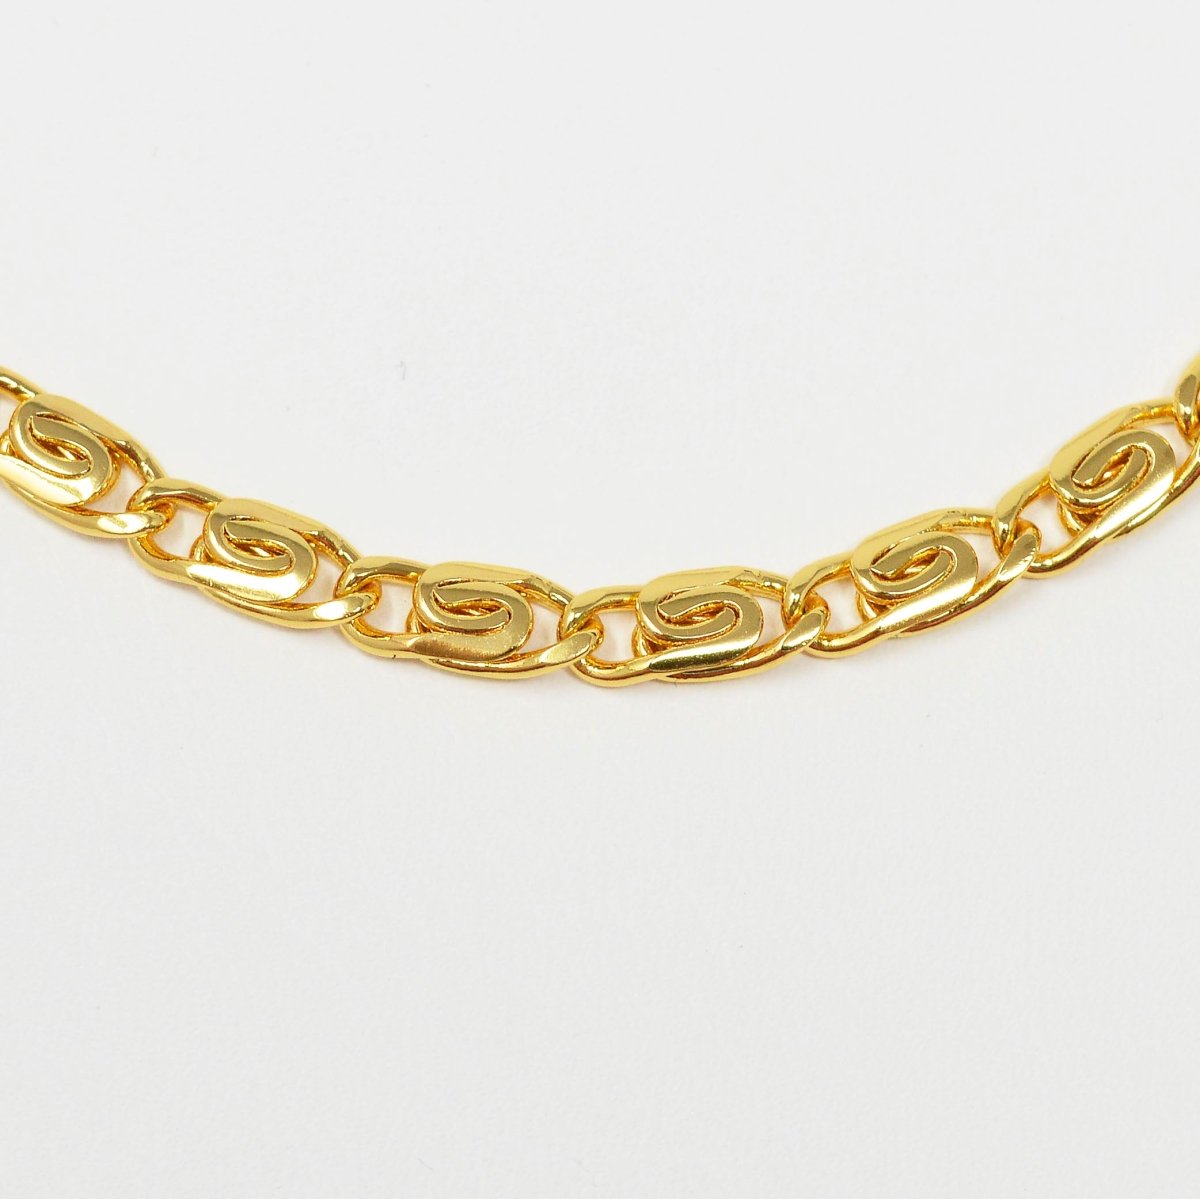 24K Gold Filled Snail Scroll Chain Finished Necklace - 20 Inches Yellow Gold Snail Chain Bold 4.5mm w/ Lobster Clasps | CN-999 Clearance Pricing - DLUXCA